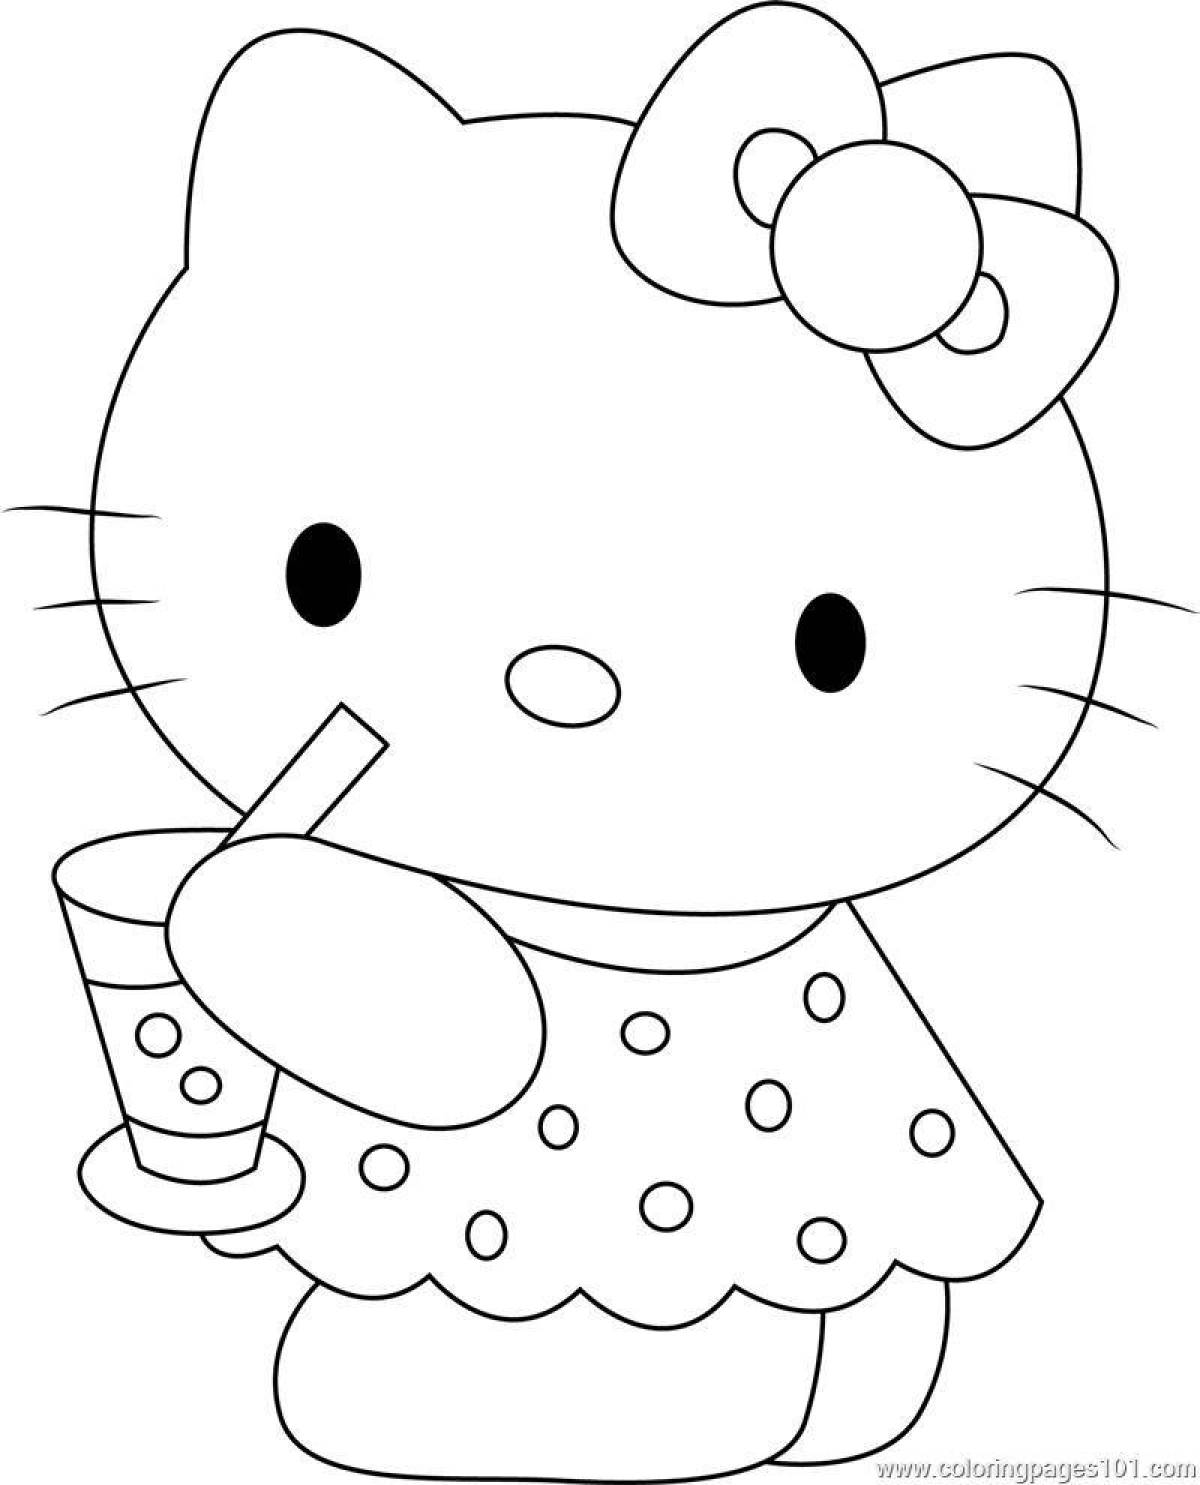 Fun coloring by numbers hello kitty